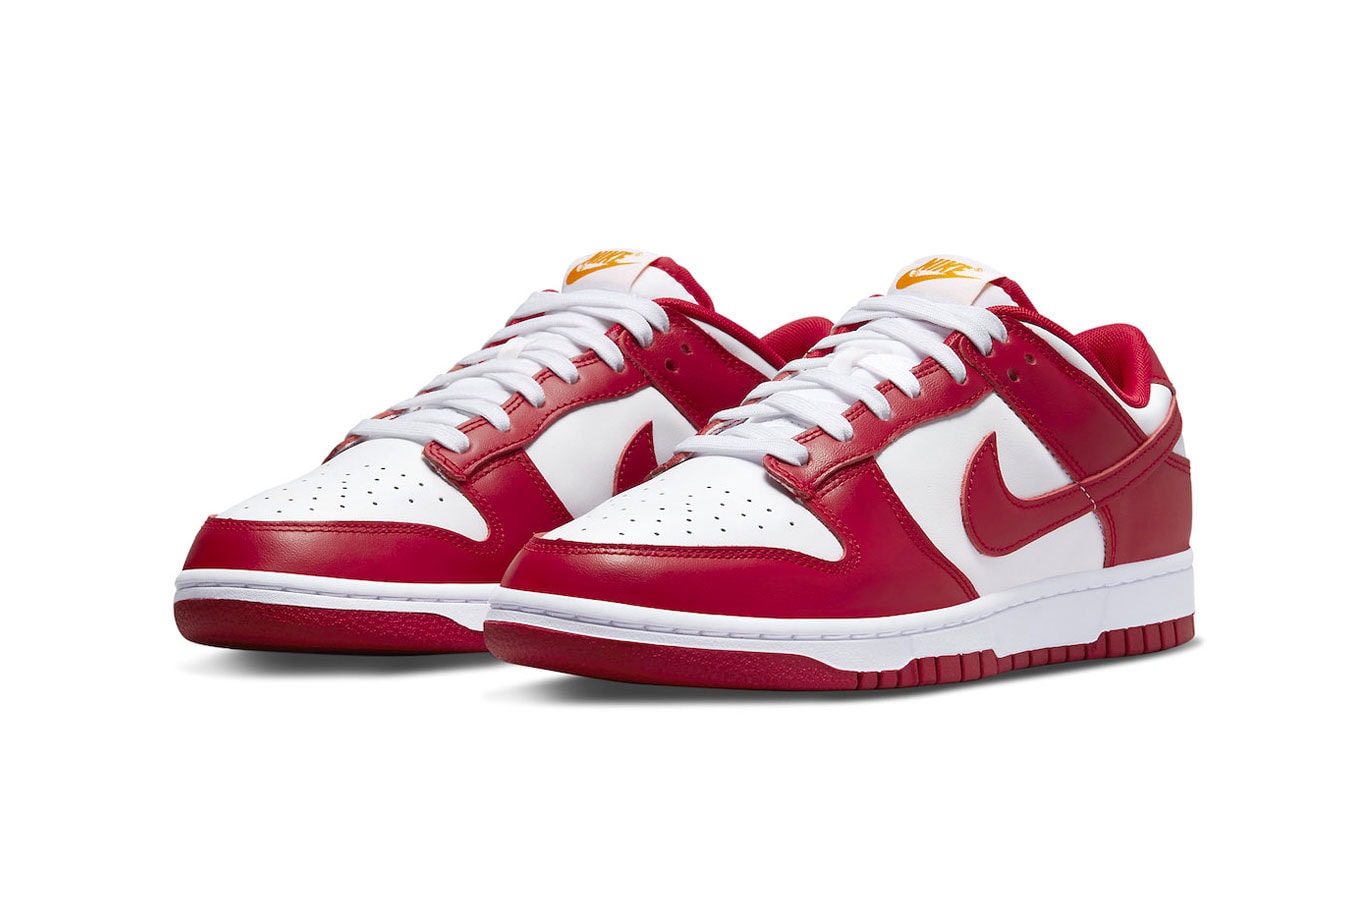 Nike Dunk Low gym red white yellow DD1391 602 2022 100 usd release info date price news